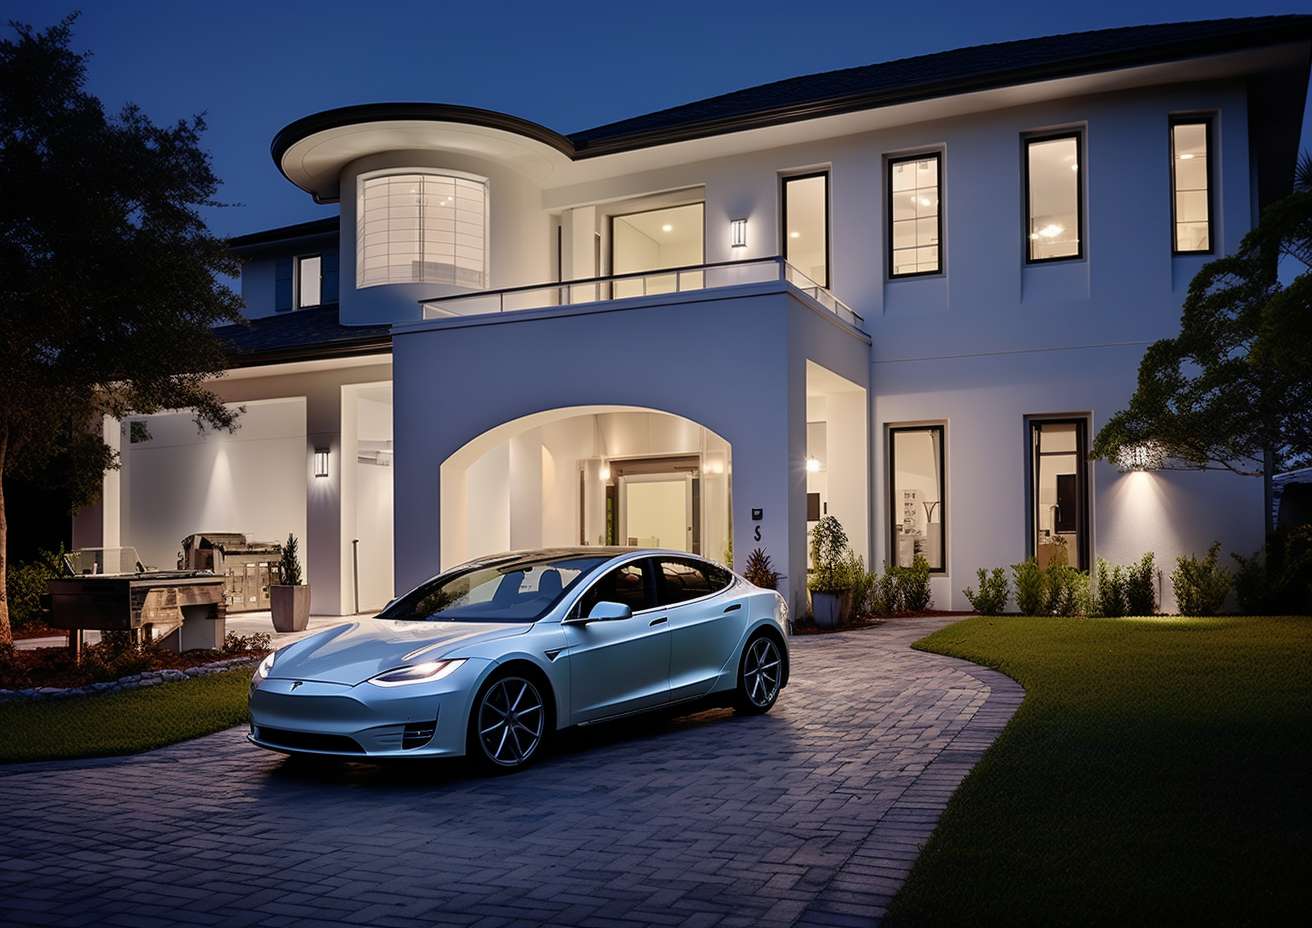 A Tesla Model 3 parked in front of a home in Jacksonville, FL at night.